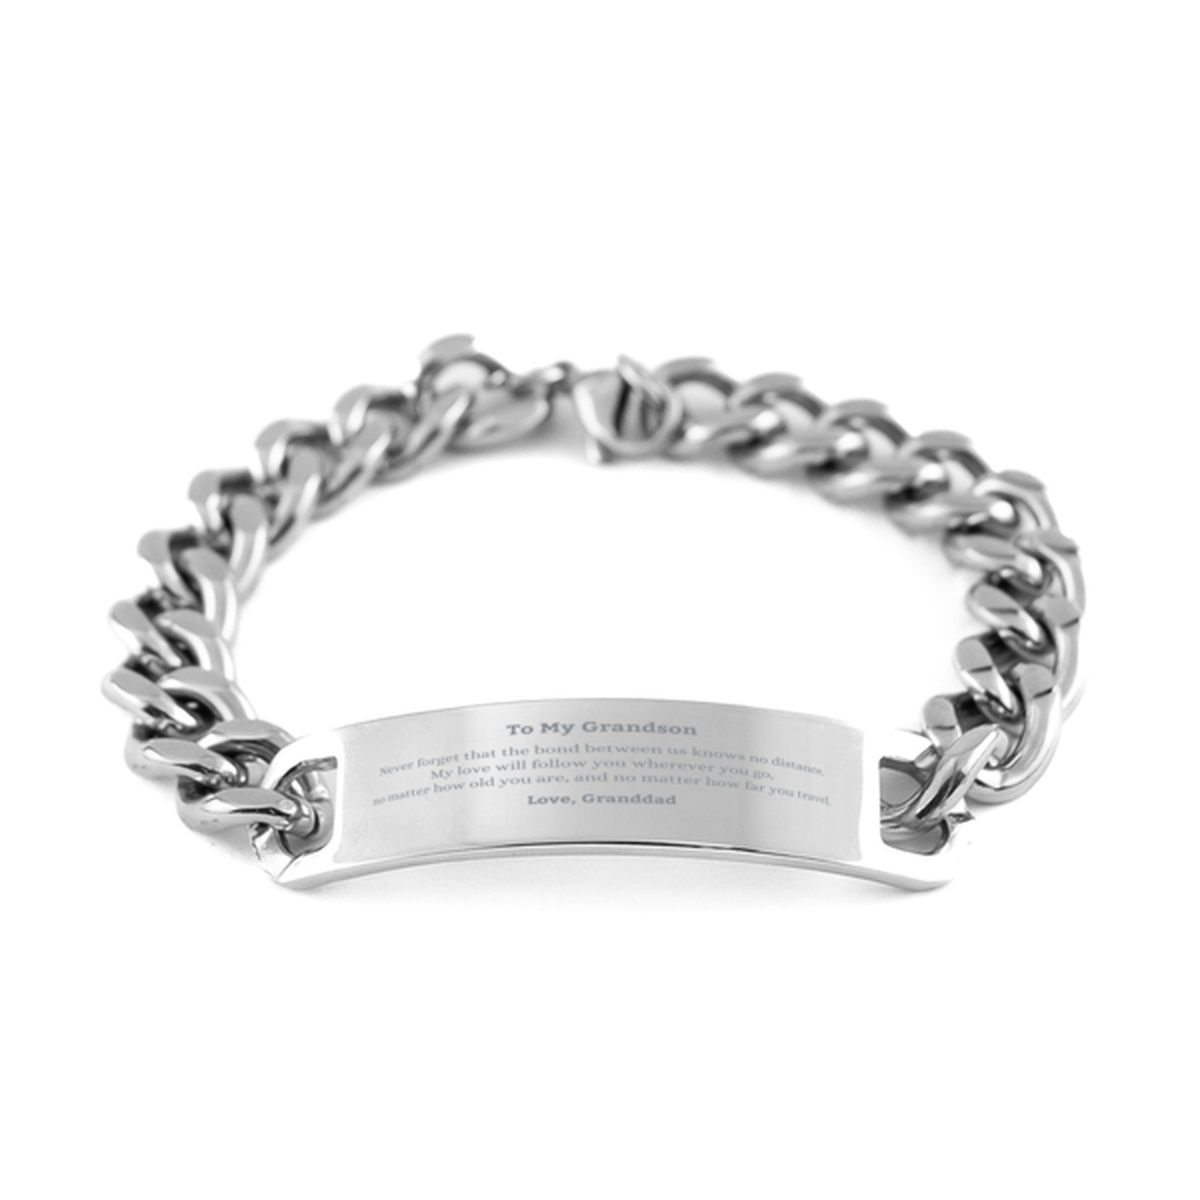 Grandson Birthday Gifts from Granddad, Adjustable Cuban Chain Stainless Steel Bracelet for Grandson Christmas Graduation Unique Gifts Grandson Never forget that the bond between us knows no distance. Love, Granddad